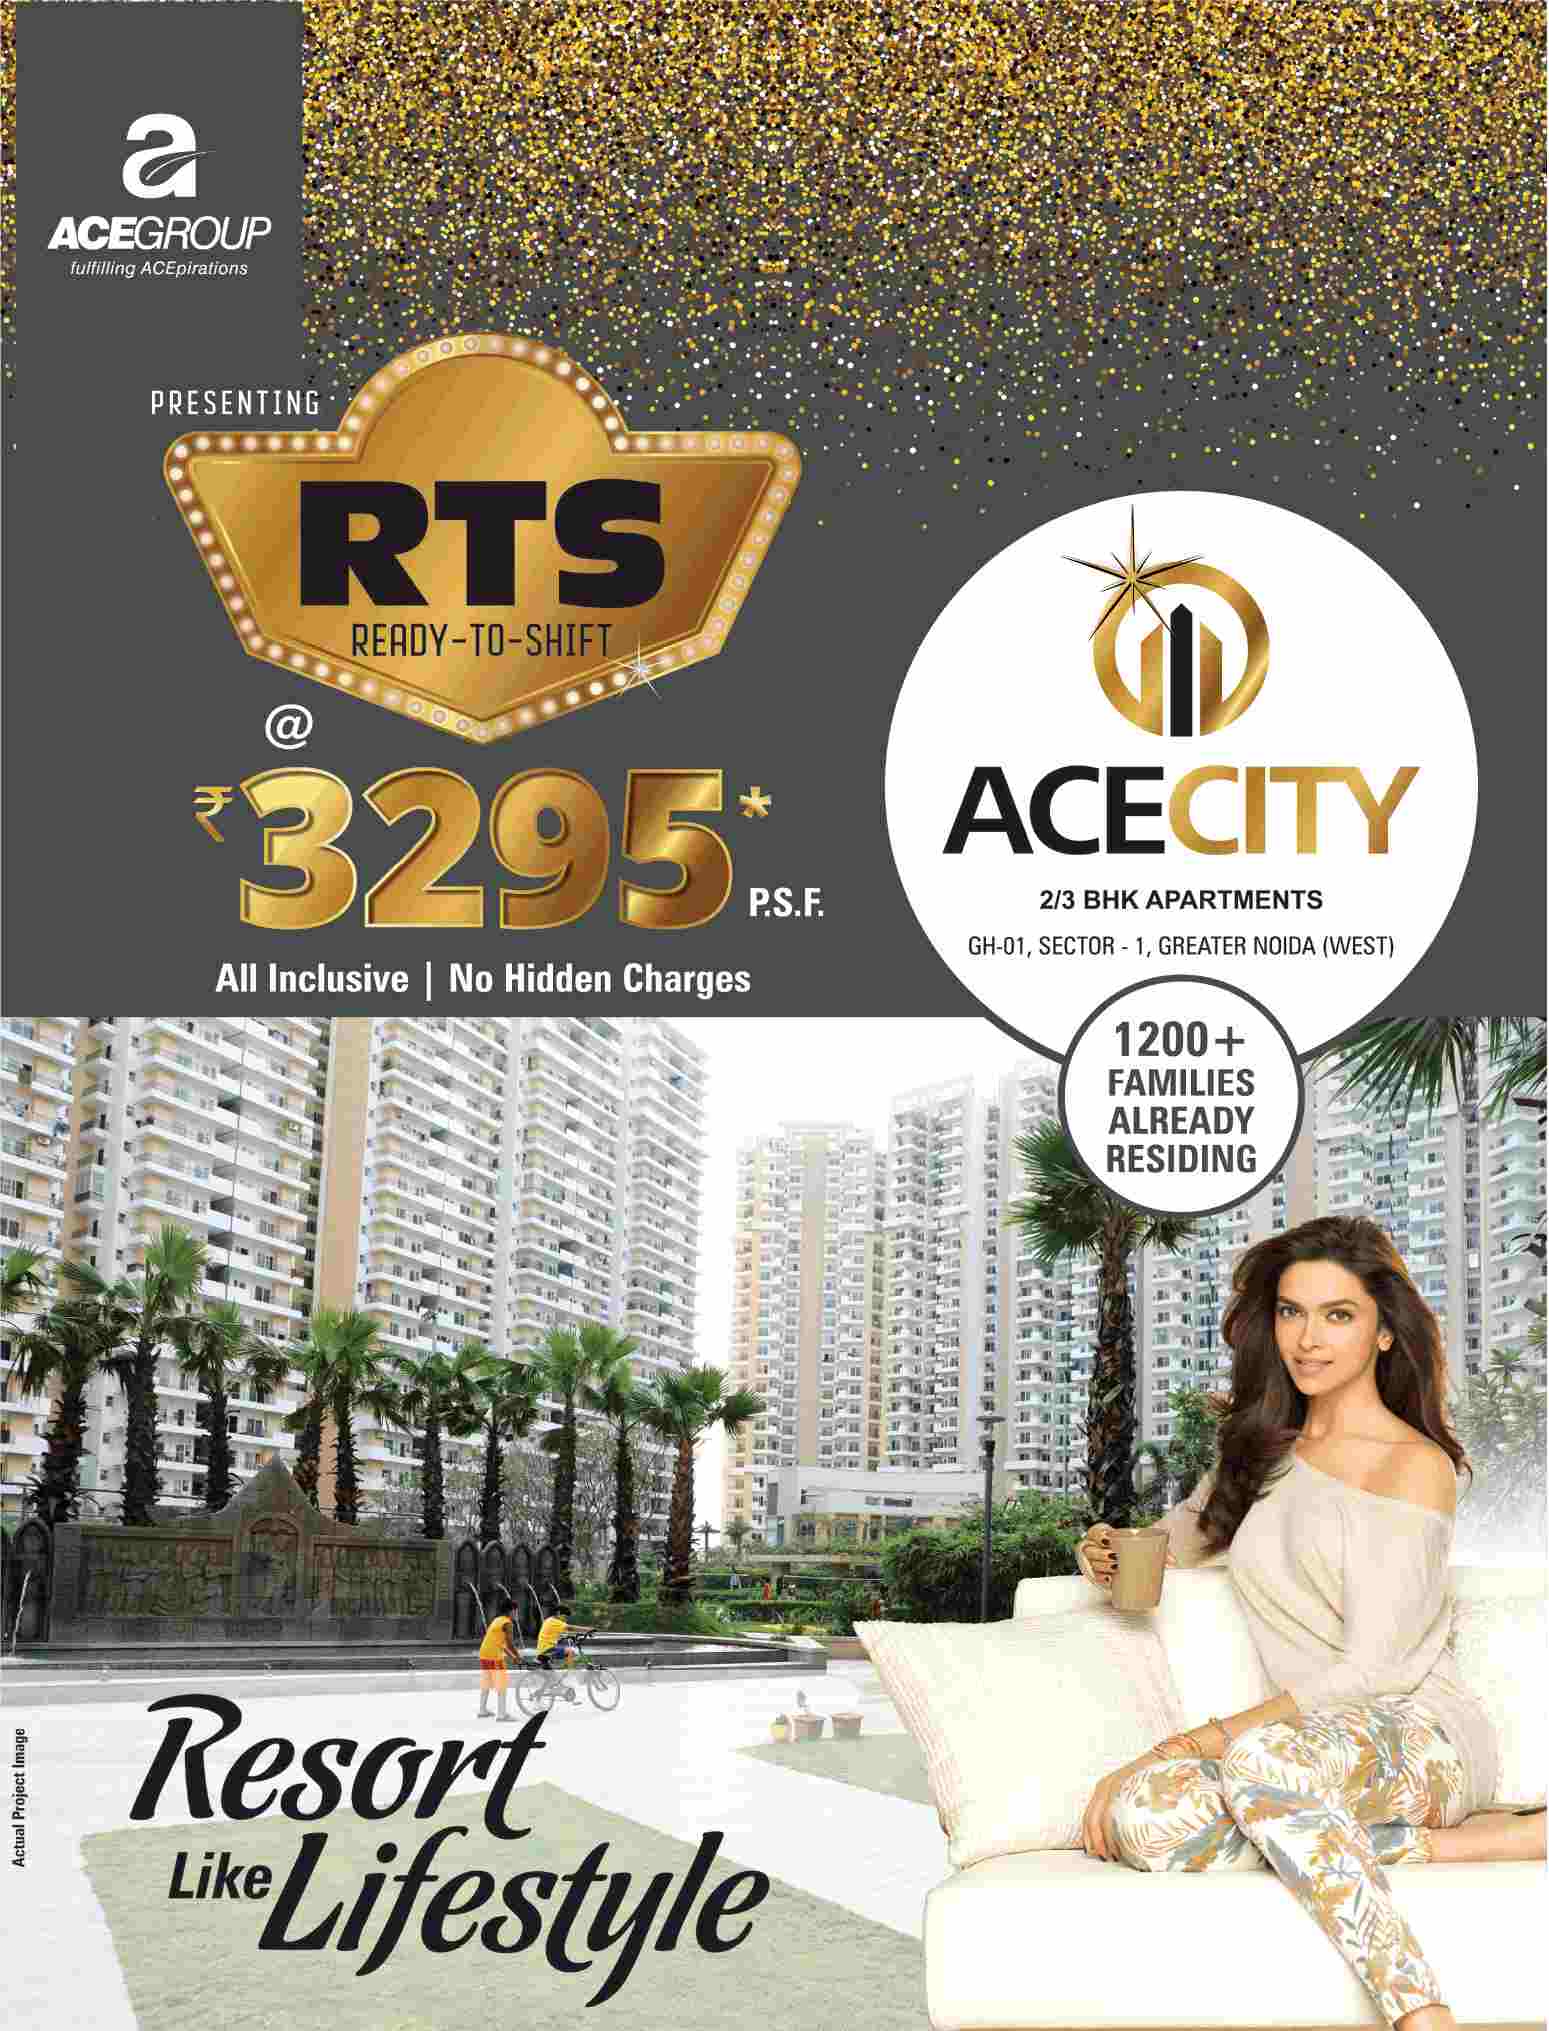 Book Ready-to-Shift homes @ Rs. 3295 per sqft. at Ace City in Greater Noida Update